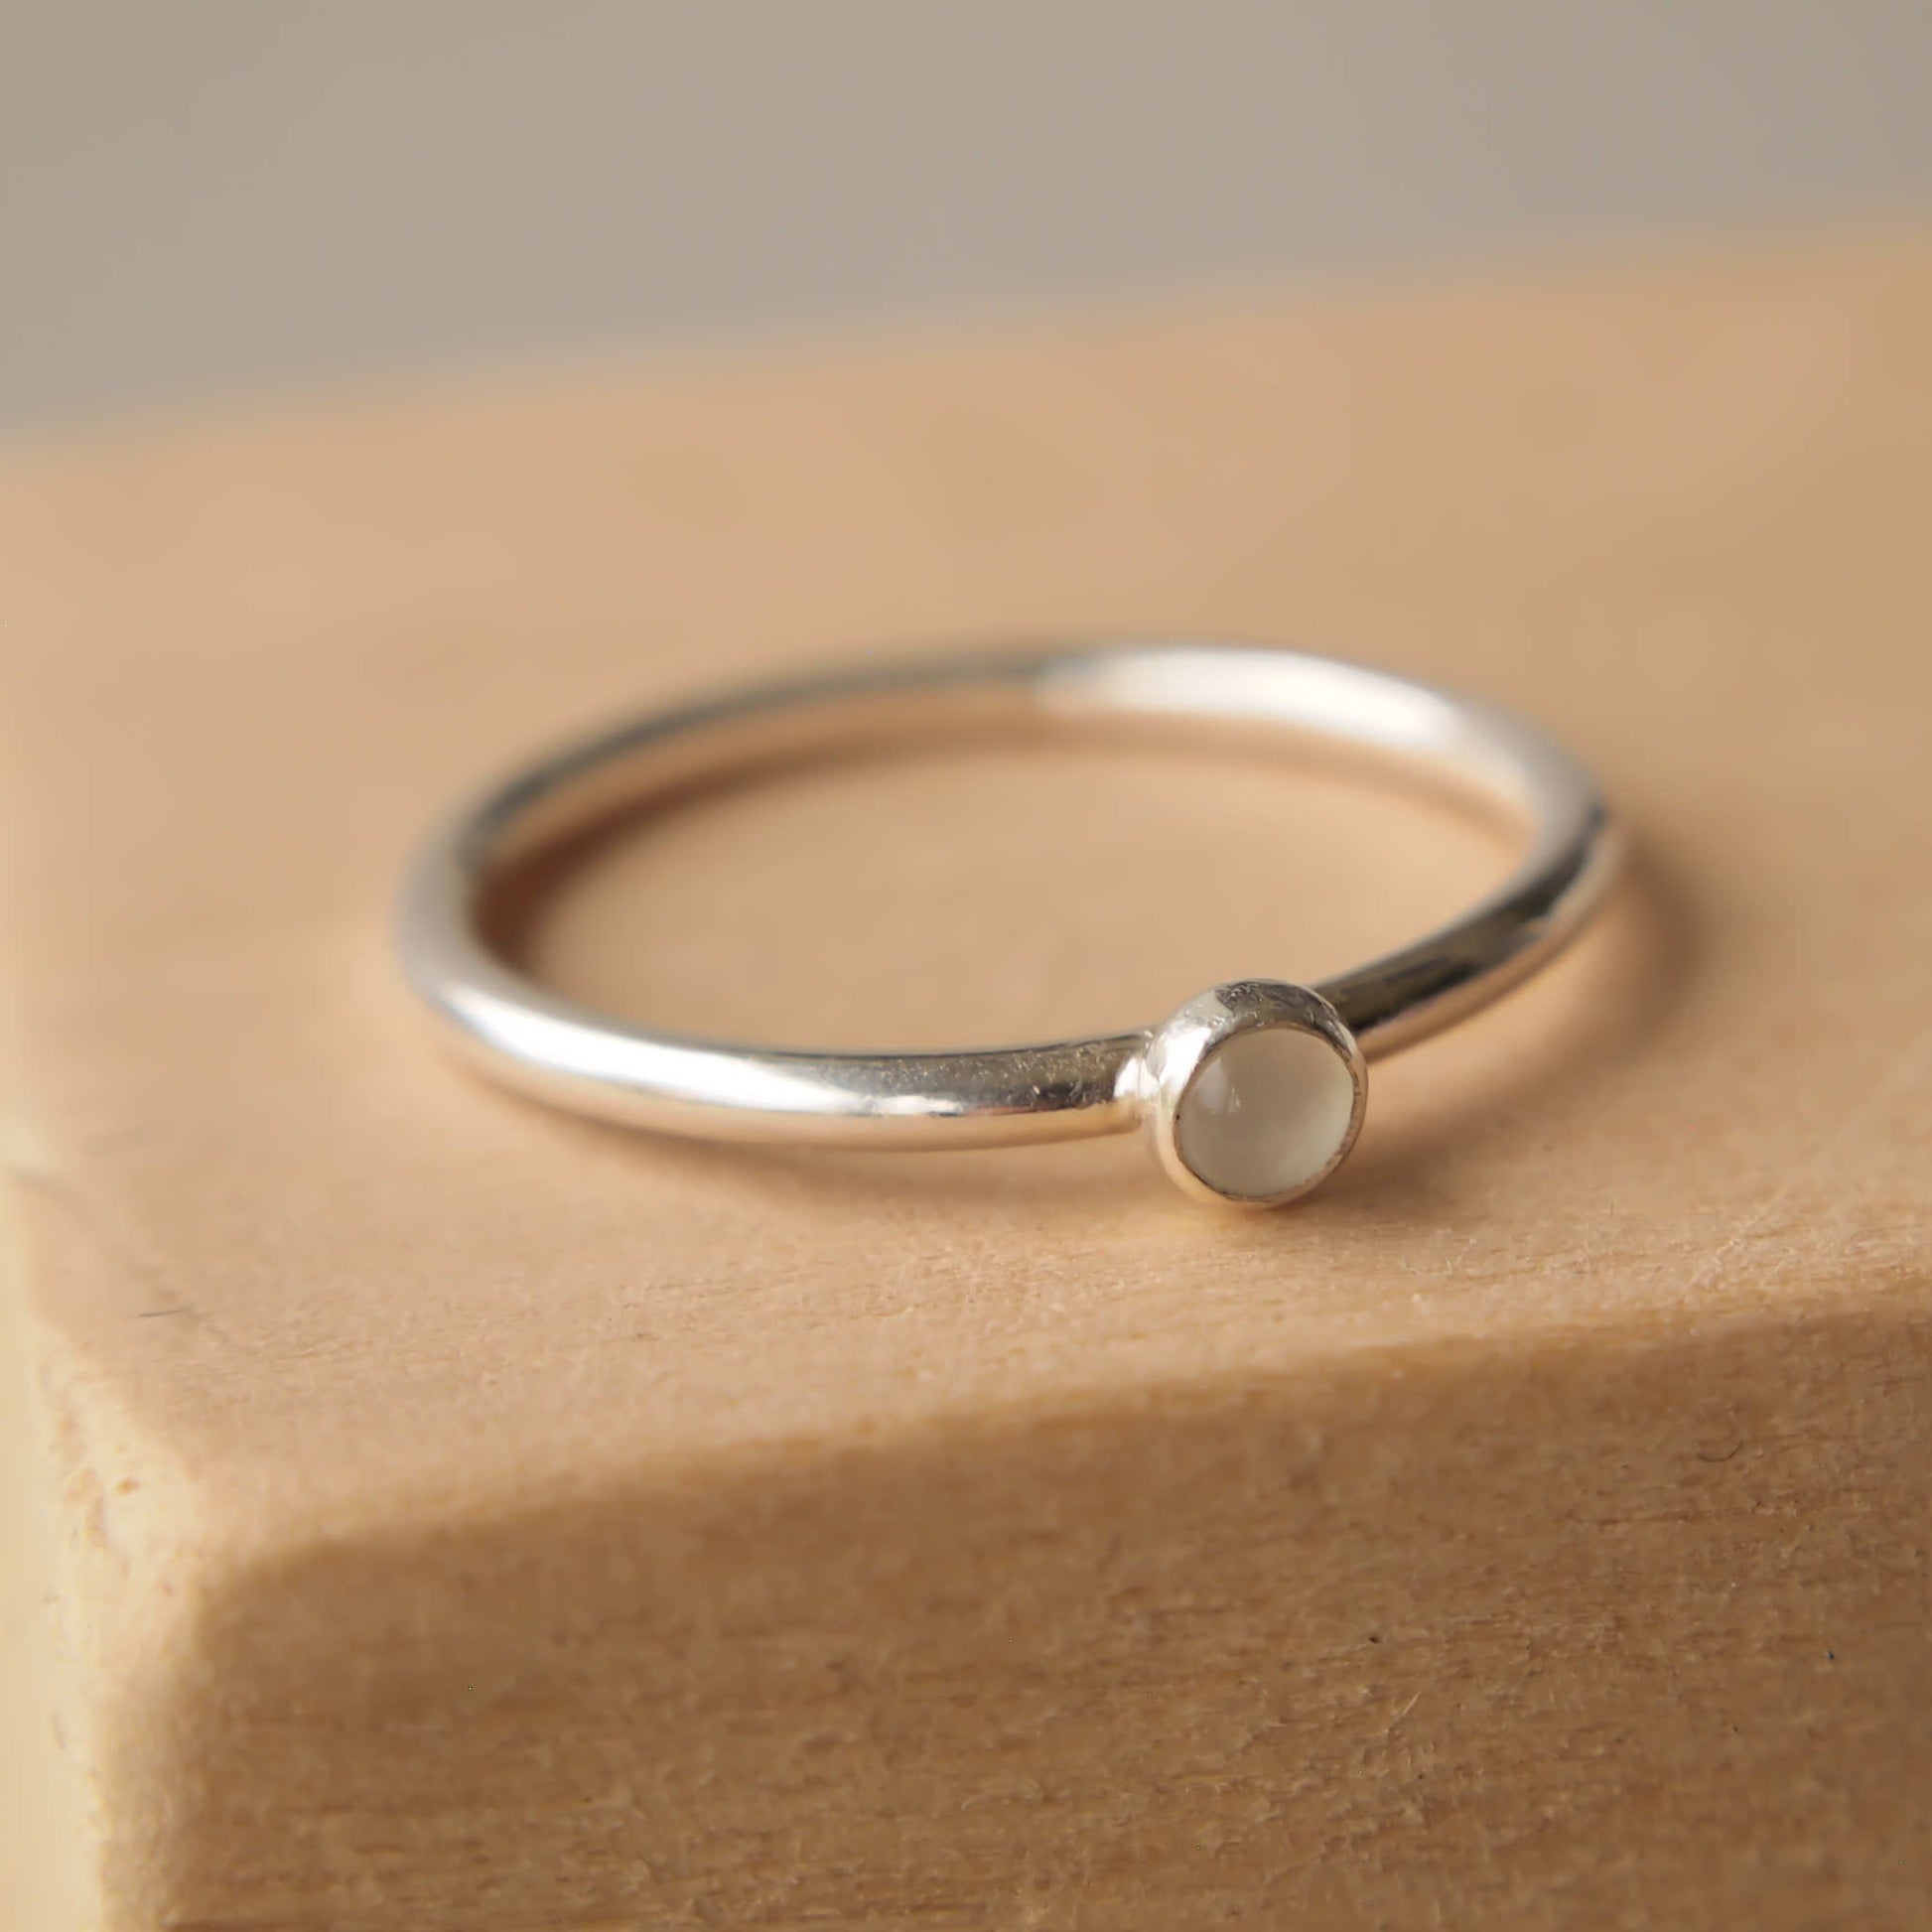 Sterling silver and moonstone cabochon ring worn on hand. 3mm sized milky white cabochon stone on a square band of sterling silver. Handmade in Scotland by maram jewellery